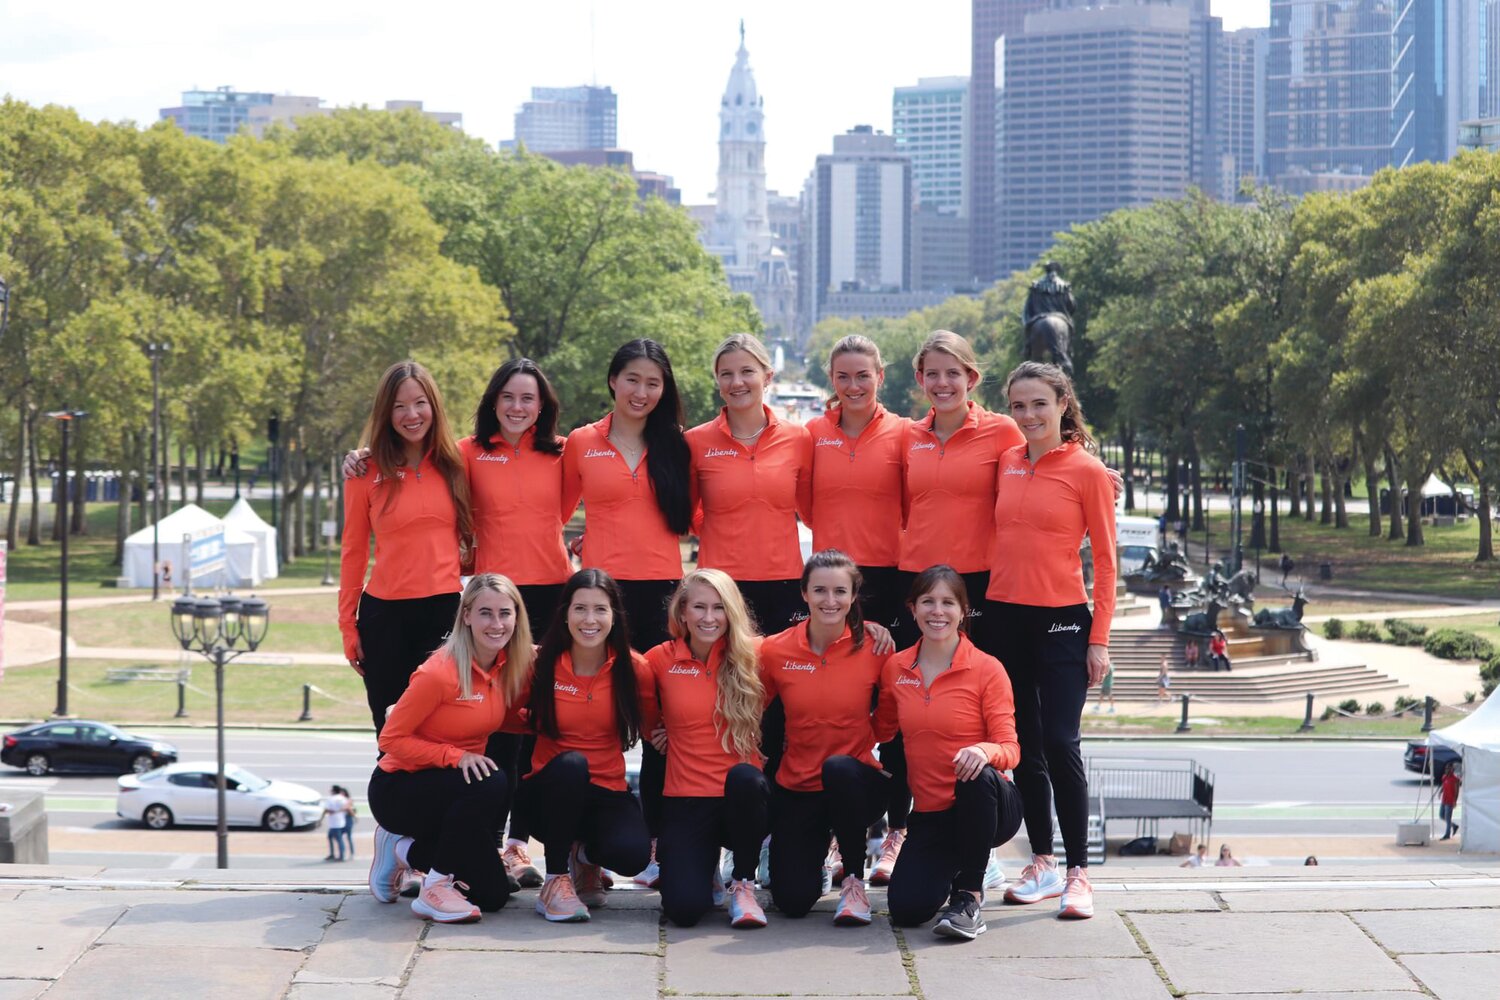 Veronica Eder, front row, center, and the Liberty Track Club are one of the top female running clubs in the Philadelphia area.